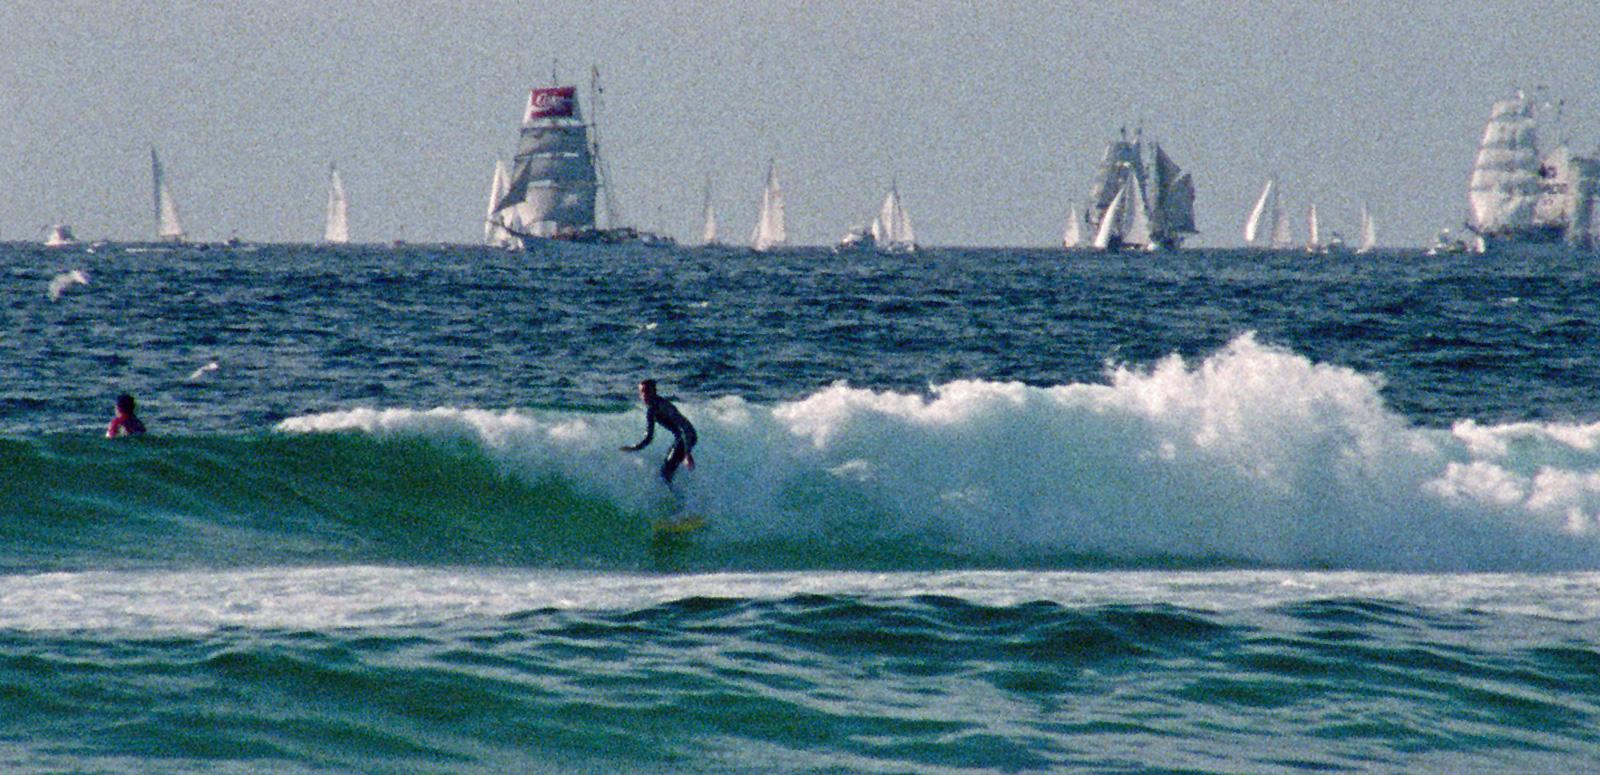 Two surfers in the ocean catching waves, in the background are tall ships and sailing boats.